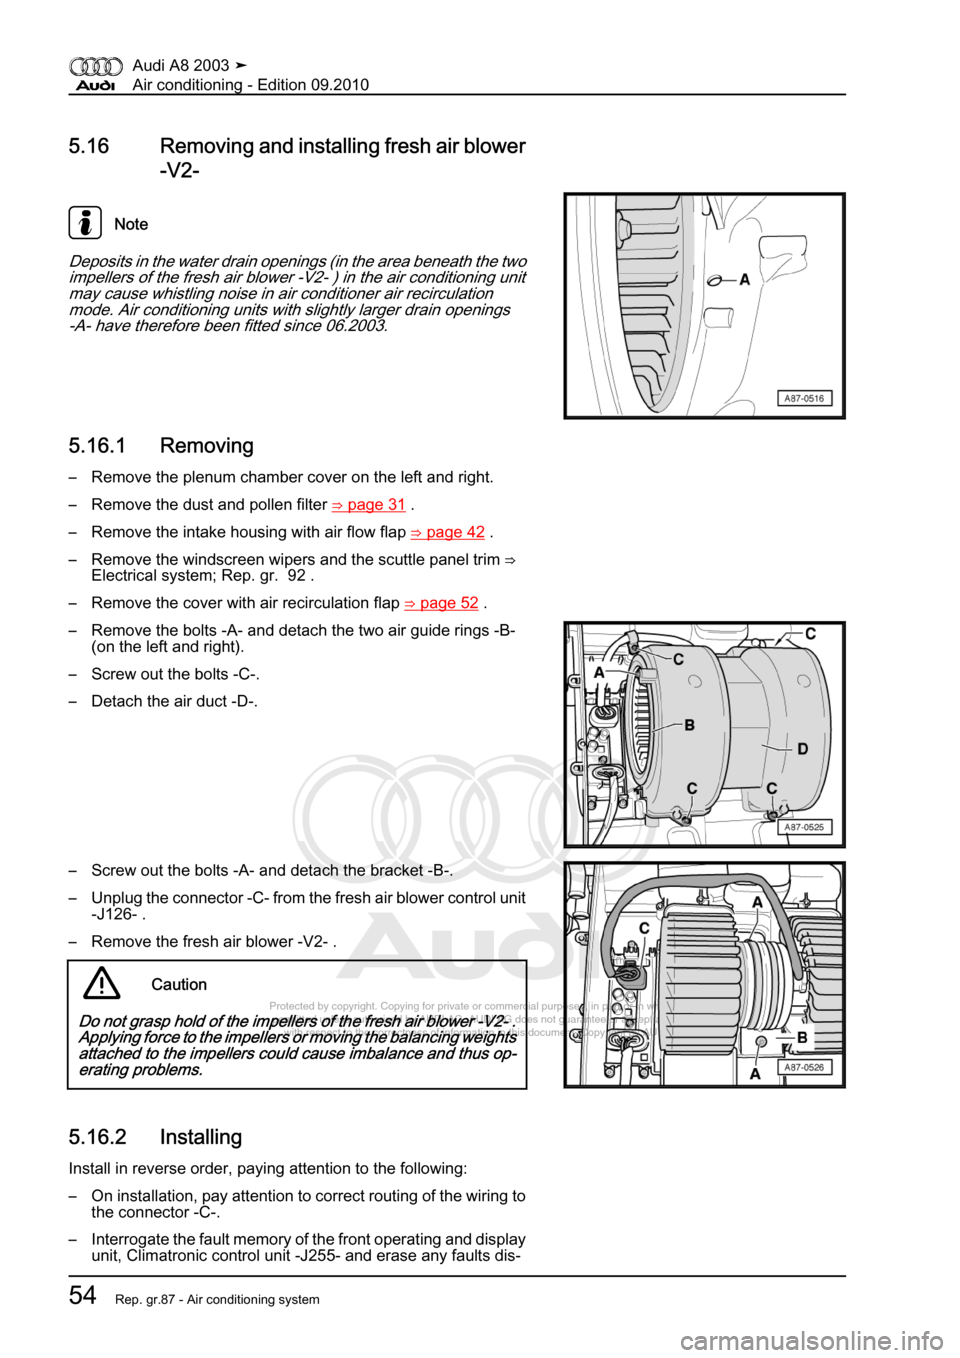 AUDI A8 2003 D3 / 2.G Air Condition Repair Manual 
Protected by copyright. Copying for private or commercial purposes, in p\
art or in whole, is not 
 permitted unless authorised by AUDI AG. AUDI AG does not guarantee or a\
ccept any liability 
     